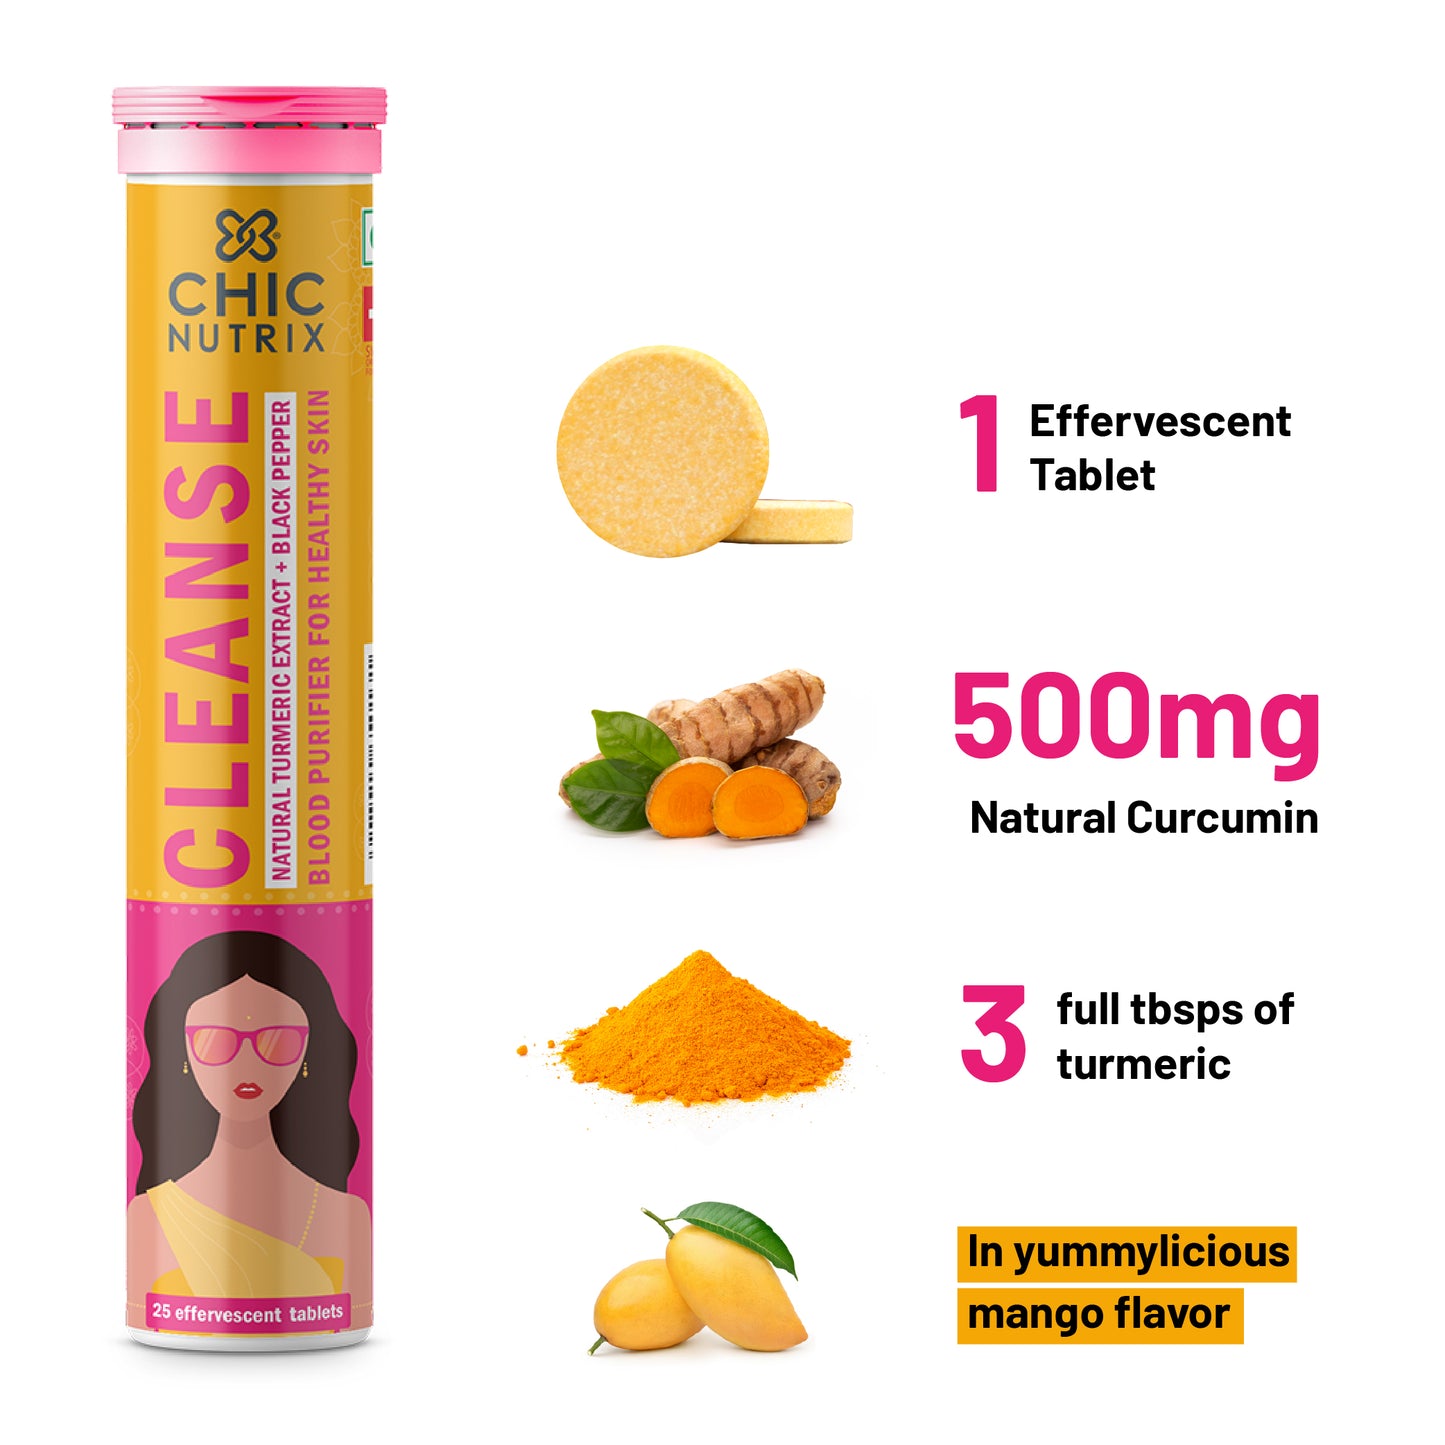 Chicnutrix Cleanse - 500mg Curcumin (Turmeric) + Piperine - Blood Purifier for Healthy Skin - 25 Effervescent Tablet - Mango Flavour